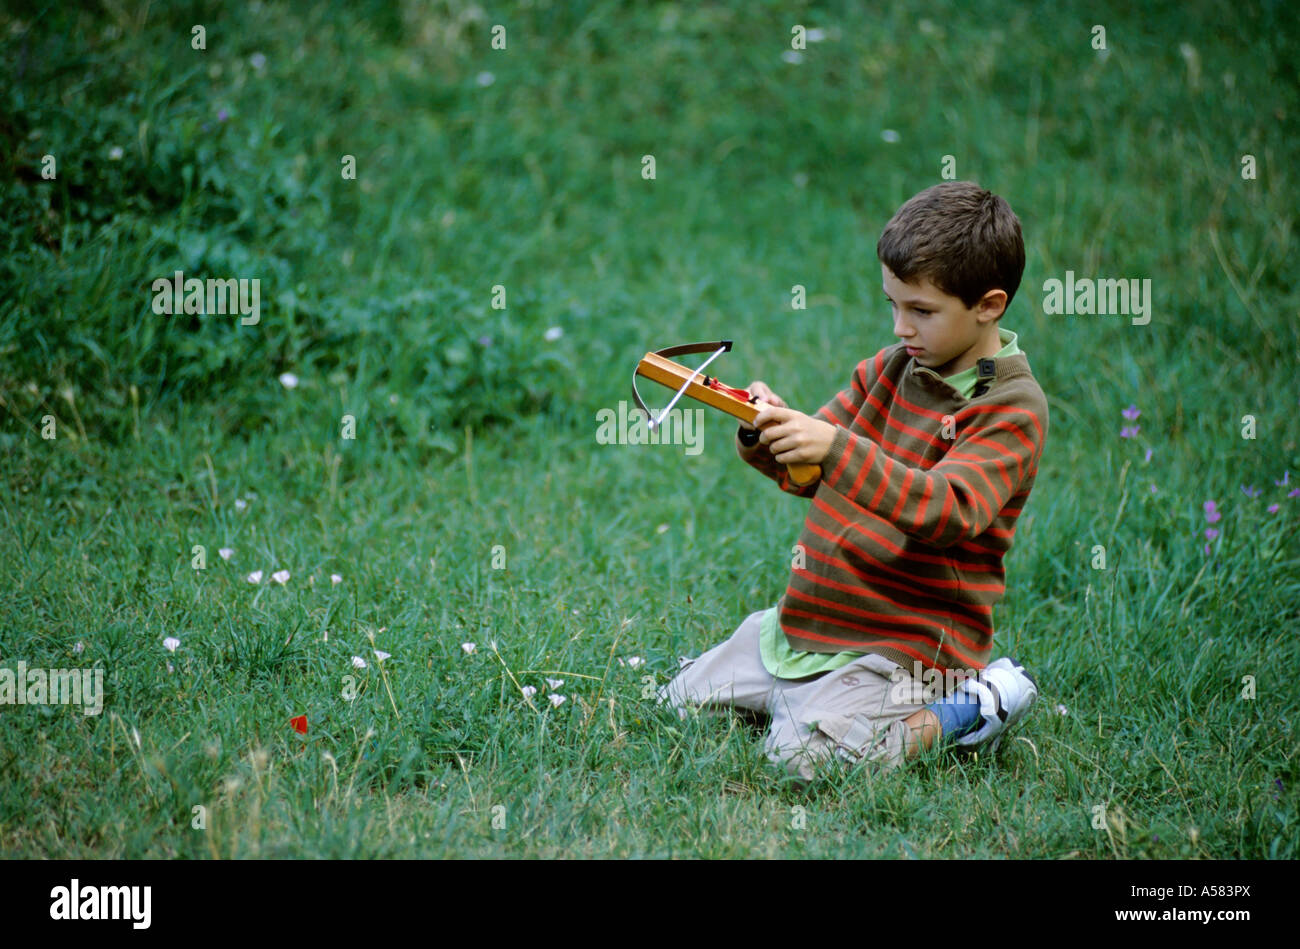 Young boy playing with a crossbow in a grassy field, Provence, France. Stock Photo